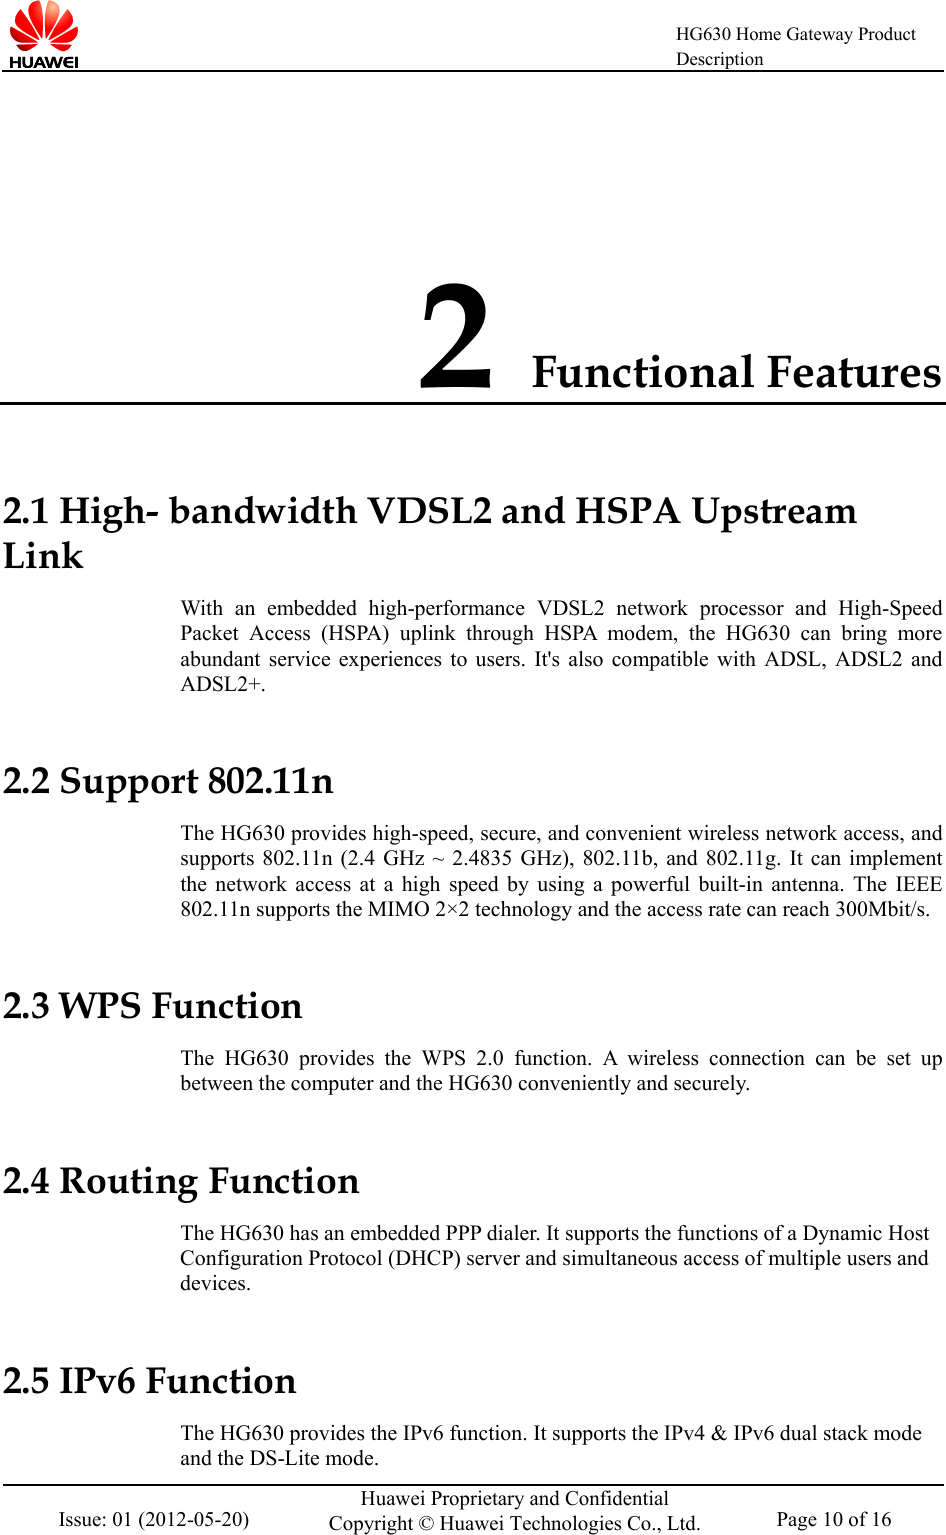    HG630 Home Gateway Product Description  Issue: 01 (2012-05-20) Huawei Proprietary and Confidential Copyright © Huawei Technologies Co., Ltd. Page 10 of 16  2 Functional Features 2.1 High- bandwidth VDSL2 and HSPA Upstream Link With an embedded high-performance  VDSL2 network processor and High-Speed Packet Access (HSPA) uplink through HSPA modem, the HG630 can bring more abundant service experiences to users. It&apos;s also compatible with ADSL, ADSL2 and ADSL2+. 2.2 Support 802.11n The HG630 provides high-speed, secure, and convenient wireless network access, and supports 802.11n (2.4 GHz ~ 2.4835 GHz), 802.11b, and 802.11g. It can implement the network access at a high speed by using a powerful built-in antenna. The IEEE 802.11n supports the MIMO 2×2 technology and the access rate can reach 300Mbit/s. 2.3 WPS Function The  HG630 provides  the WPS 2.0 function.  A  wireless connection can be set up between the computer and the HG630 conveniently and securely. 2.4 Routing Function The HG630 has an embedded PPP dialer. It supports the functions of a Dynamic Host Configuration Protocol (DHCP) server and simultaneous access of multiple users and devices. 2.5 IPv6 Function   The HG630 provides the IPv6 function. It supports the IPv4 &amp; IPv6 dual stack mode and the DS-Lite mode. 